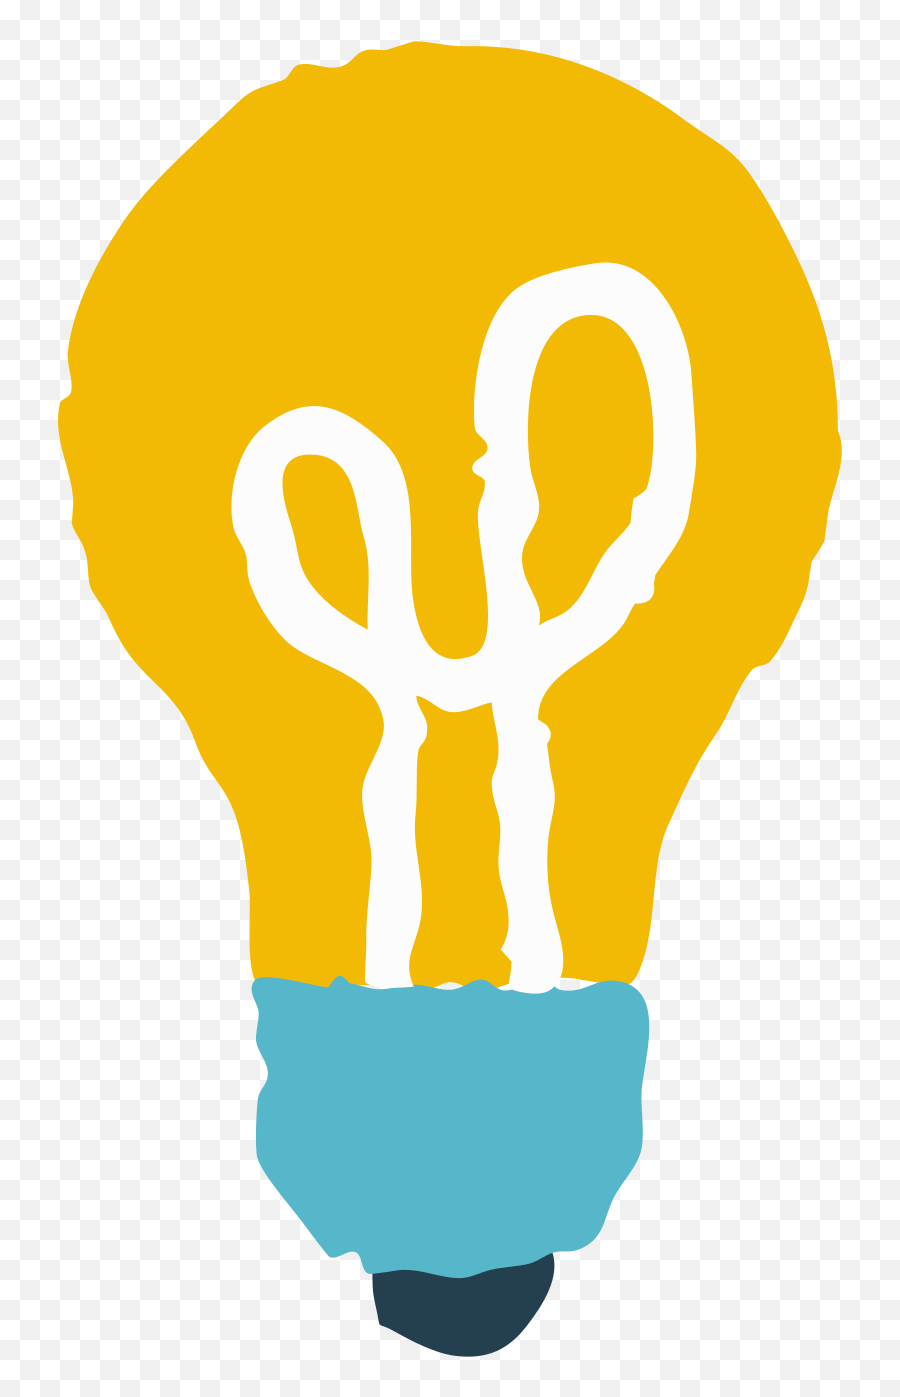 Style Light Bulb Vector Images In Png And Svg Icons8 - Compact Fluorescent Lamp,Yellow Light Icon